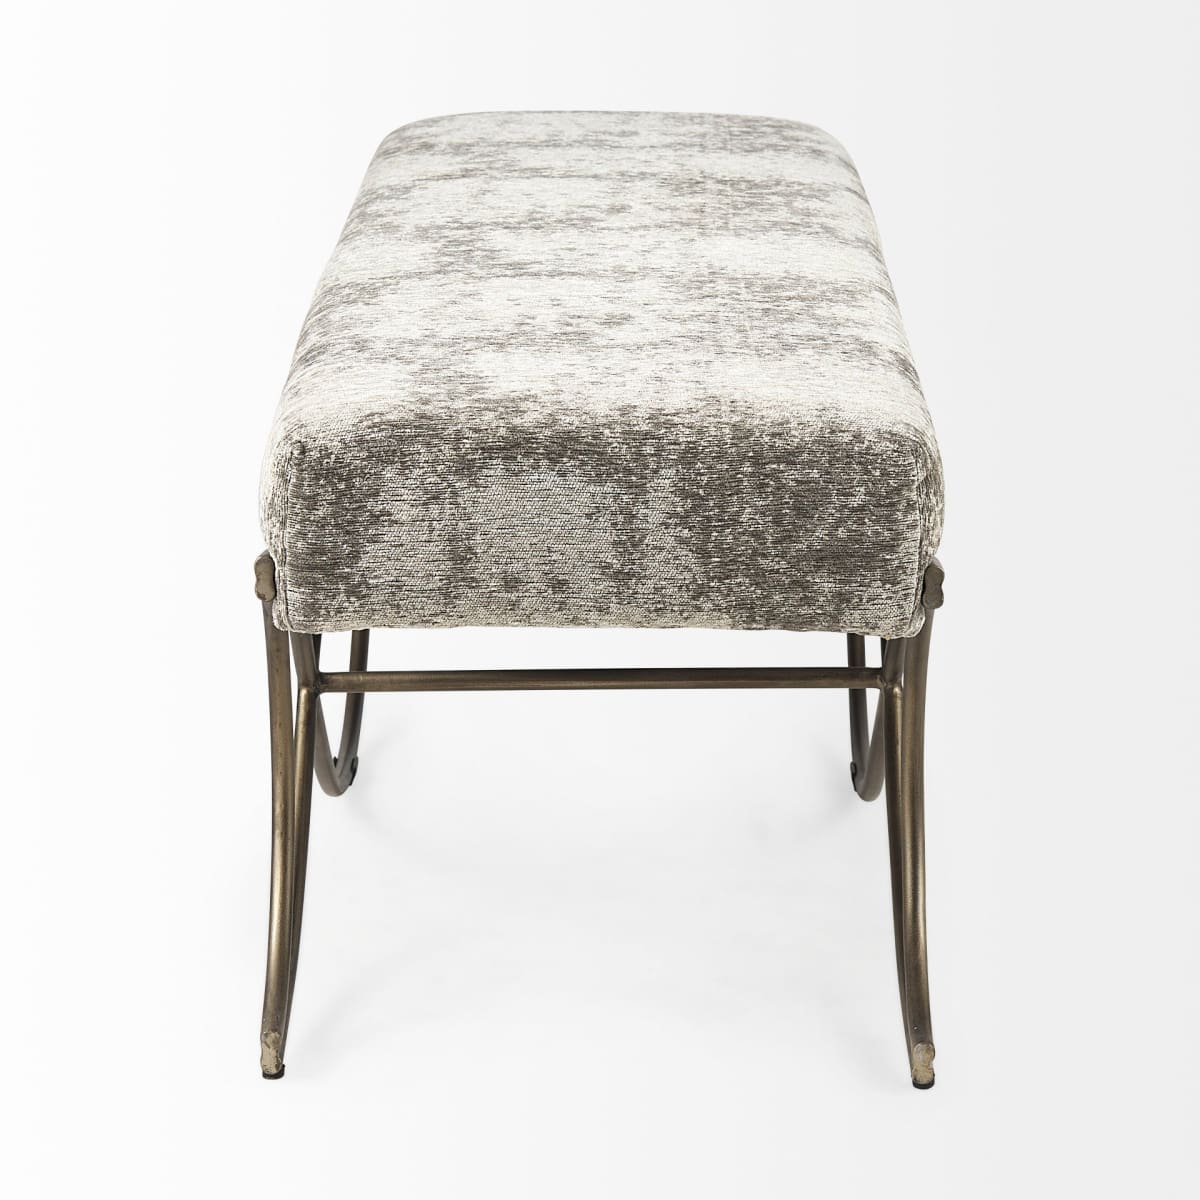 Ayla Bench Light/Dark Gray Fabric | Antique Gold - benches